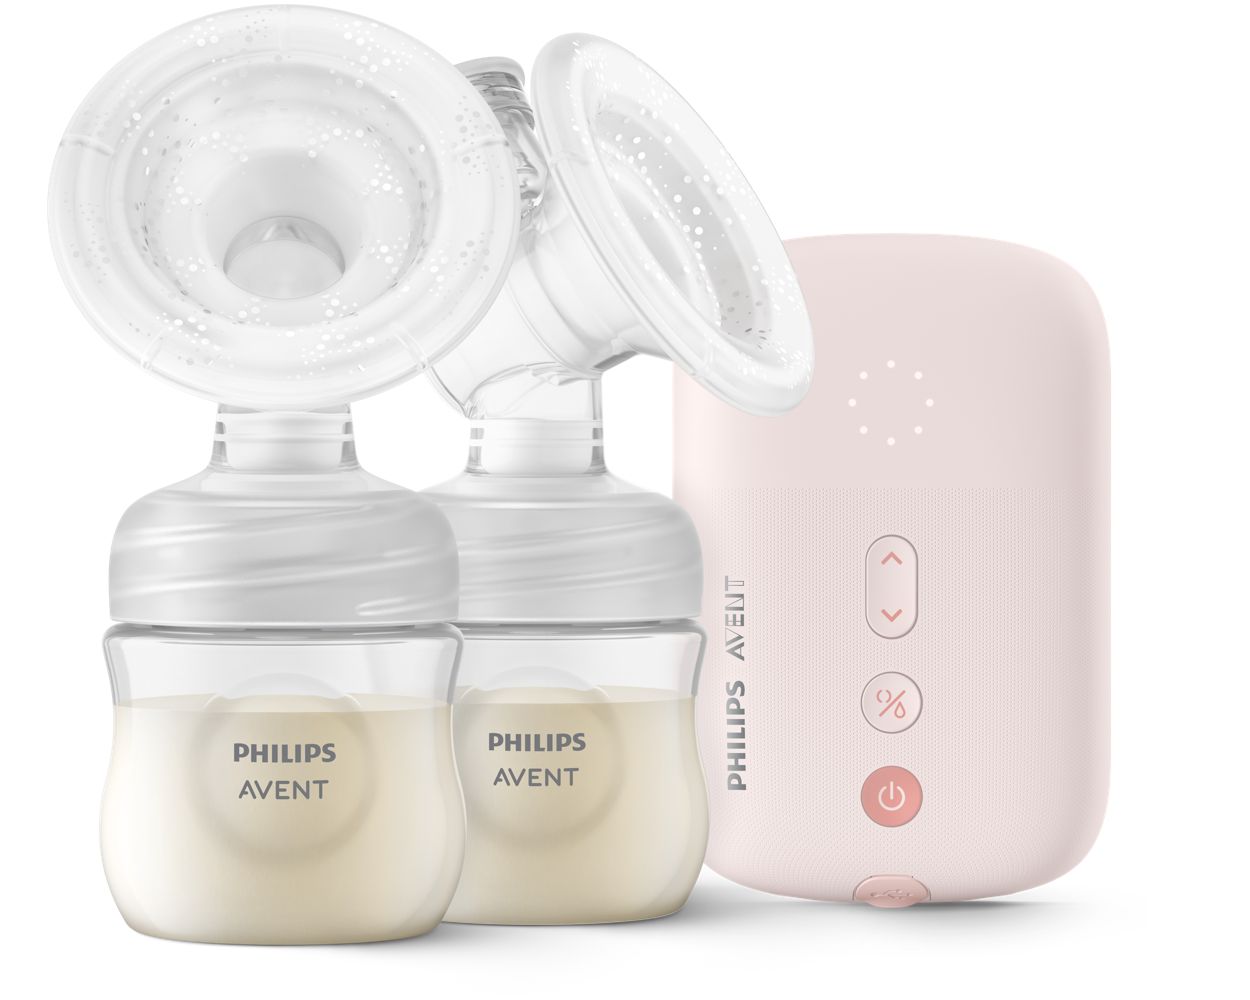 How to choose the Best Electric Breast Pump: The Ultimate Guide